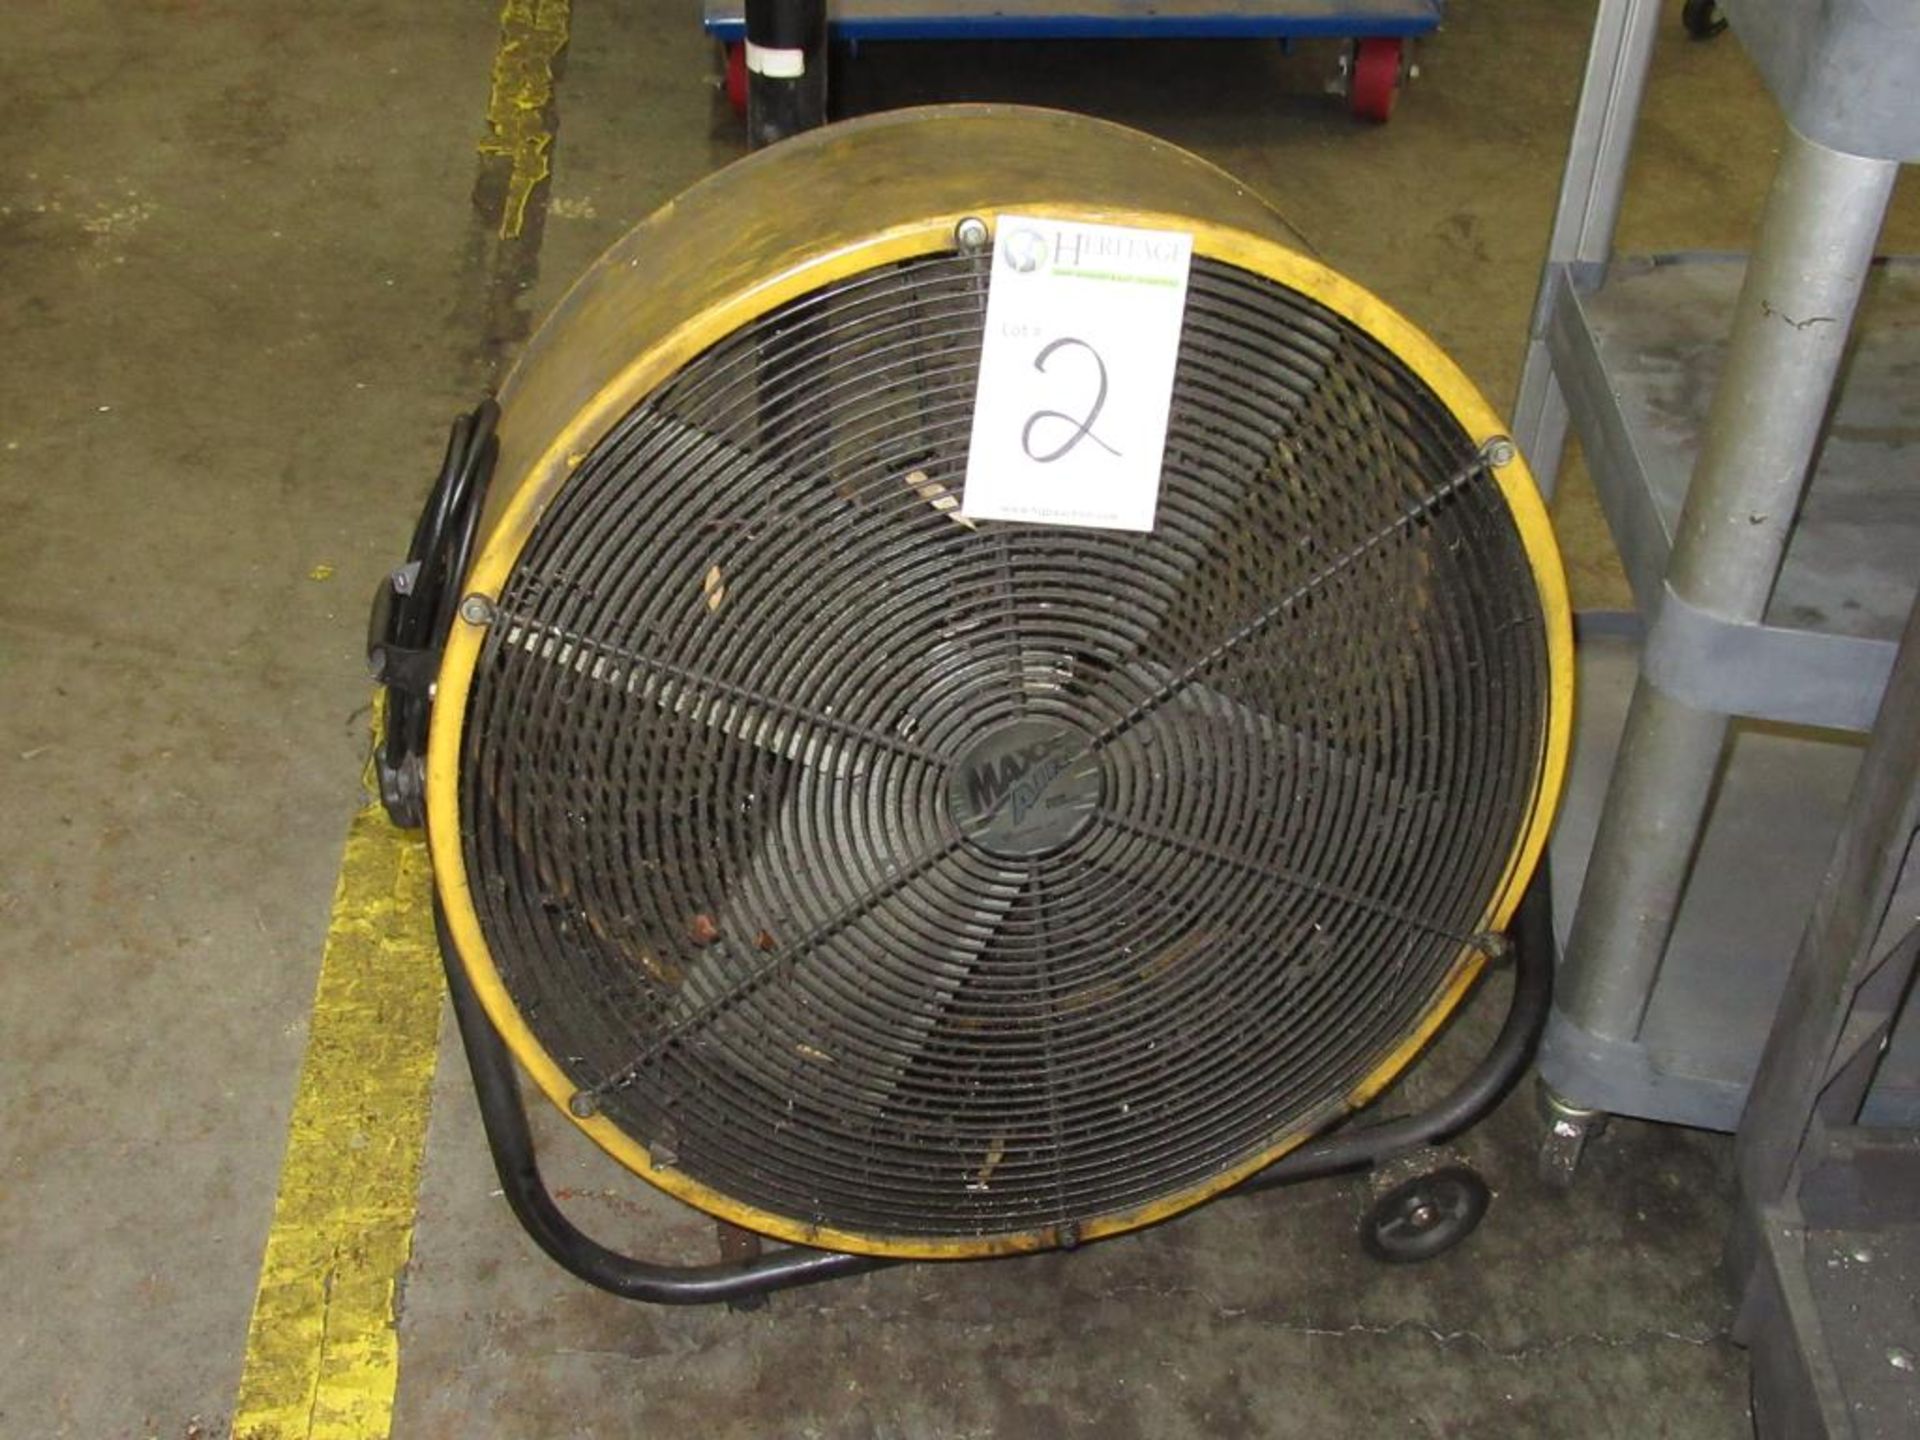 Maxx Air 26" Dia. Floor Fan with 2-Wheels. HIT# 2194889. Asset(s) Located at 14582 Goldenwest